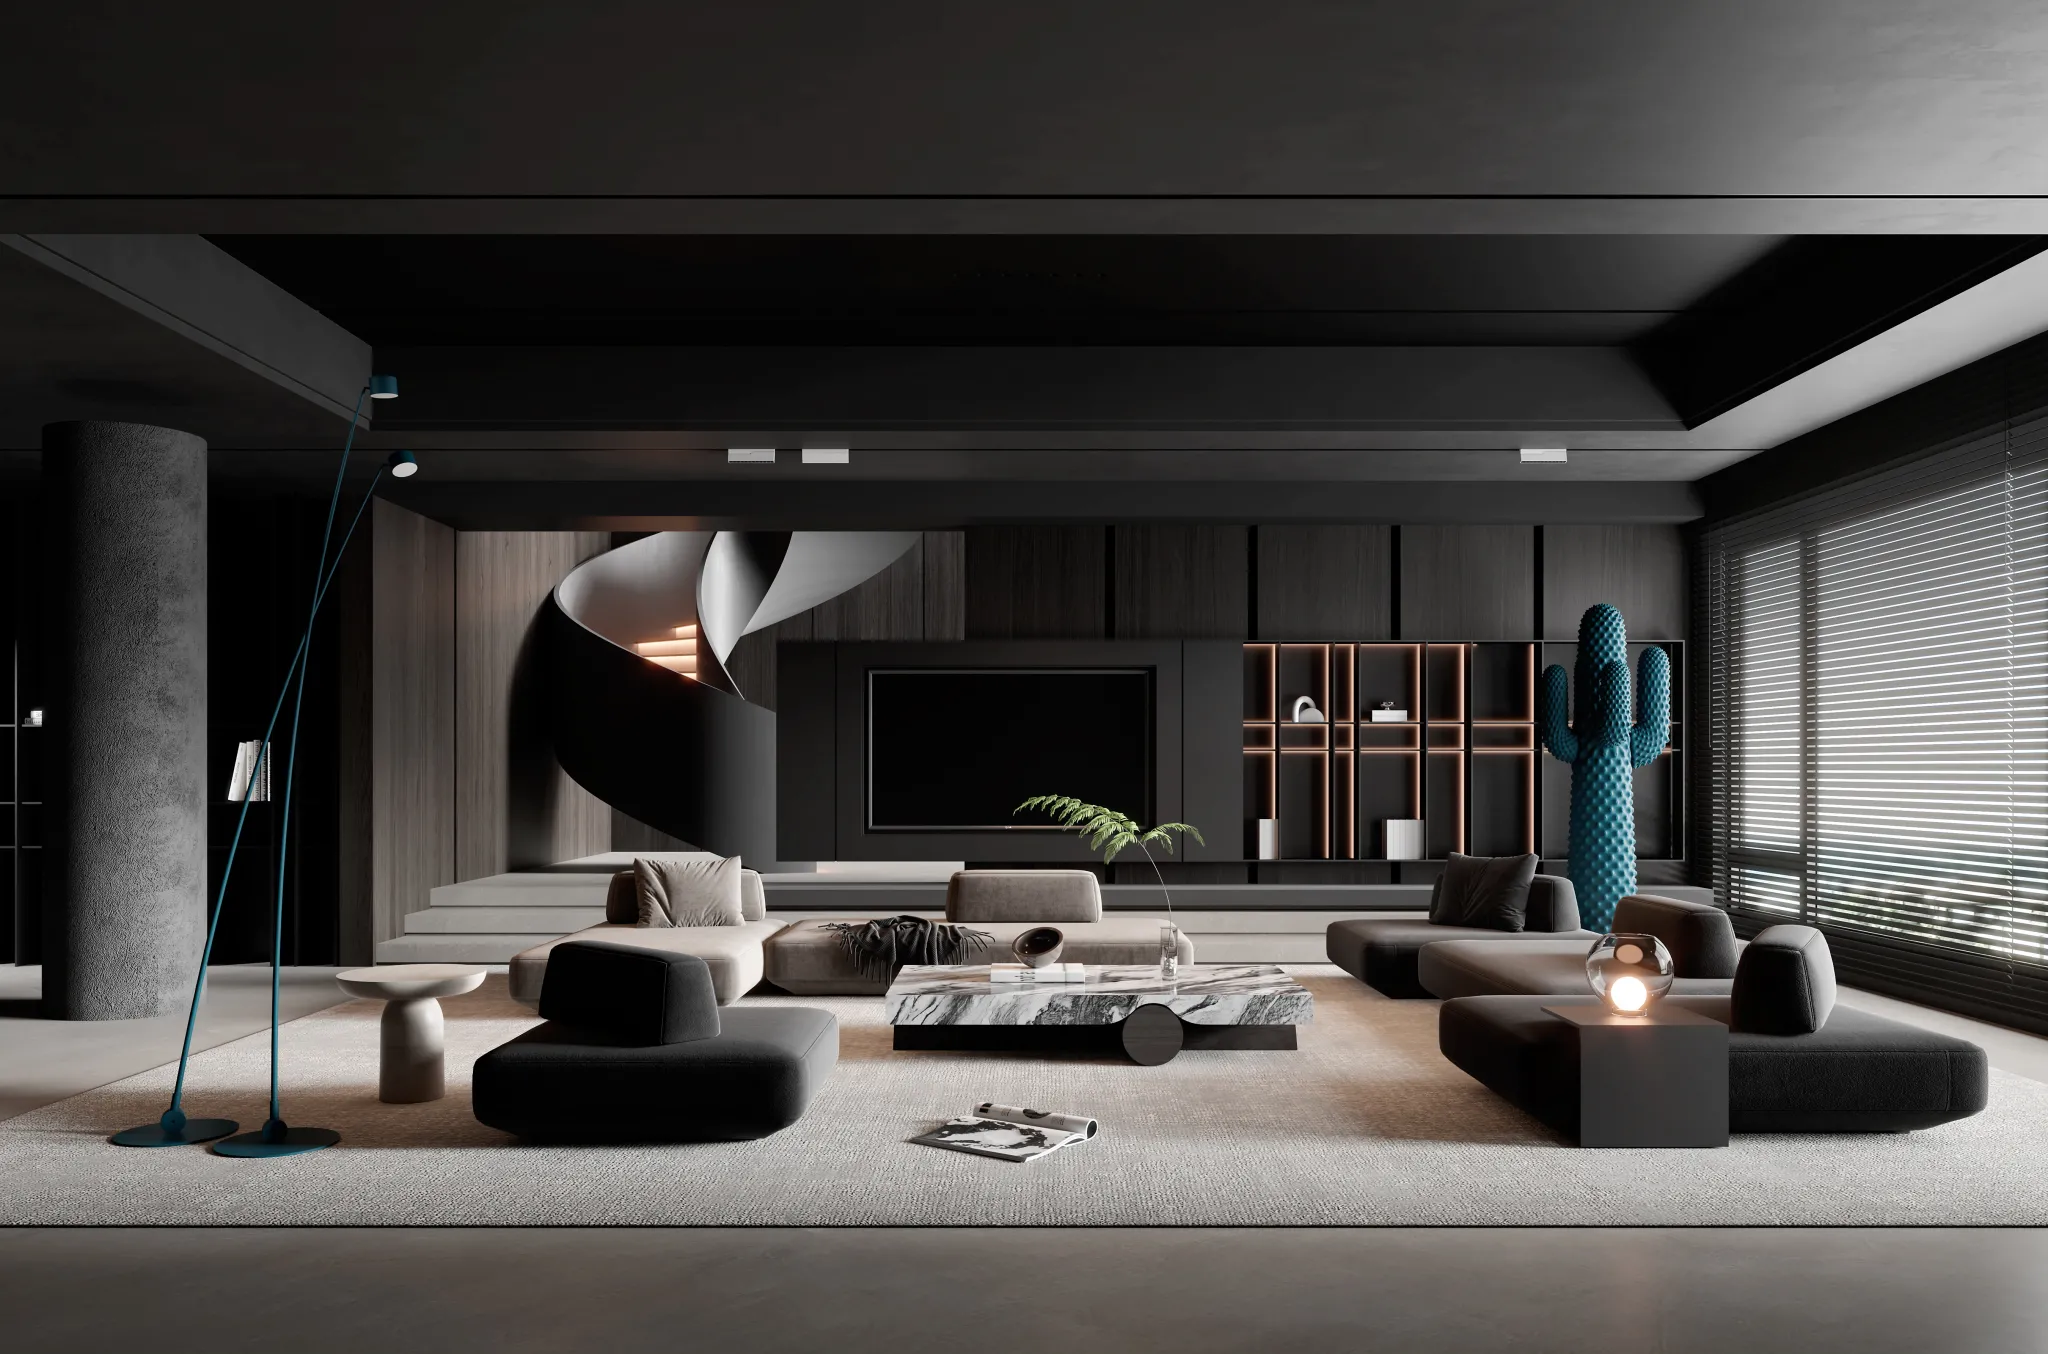 HOUSE SPACE 3D SCENES – LIVING ROOM – 0013